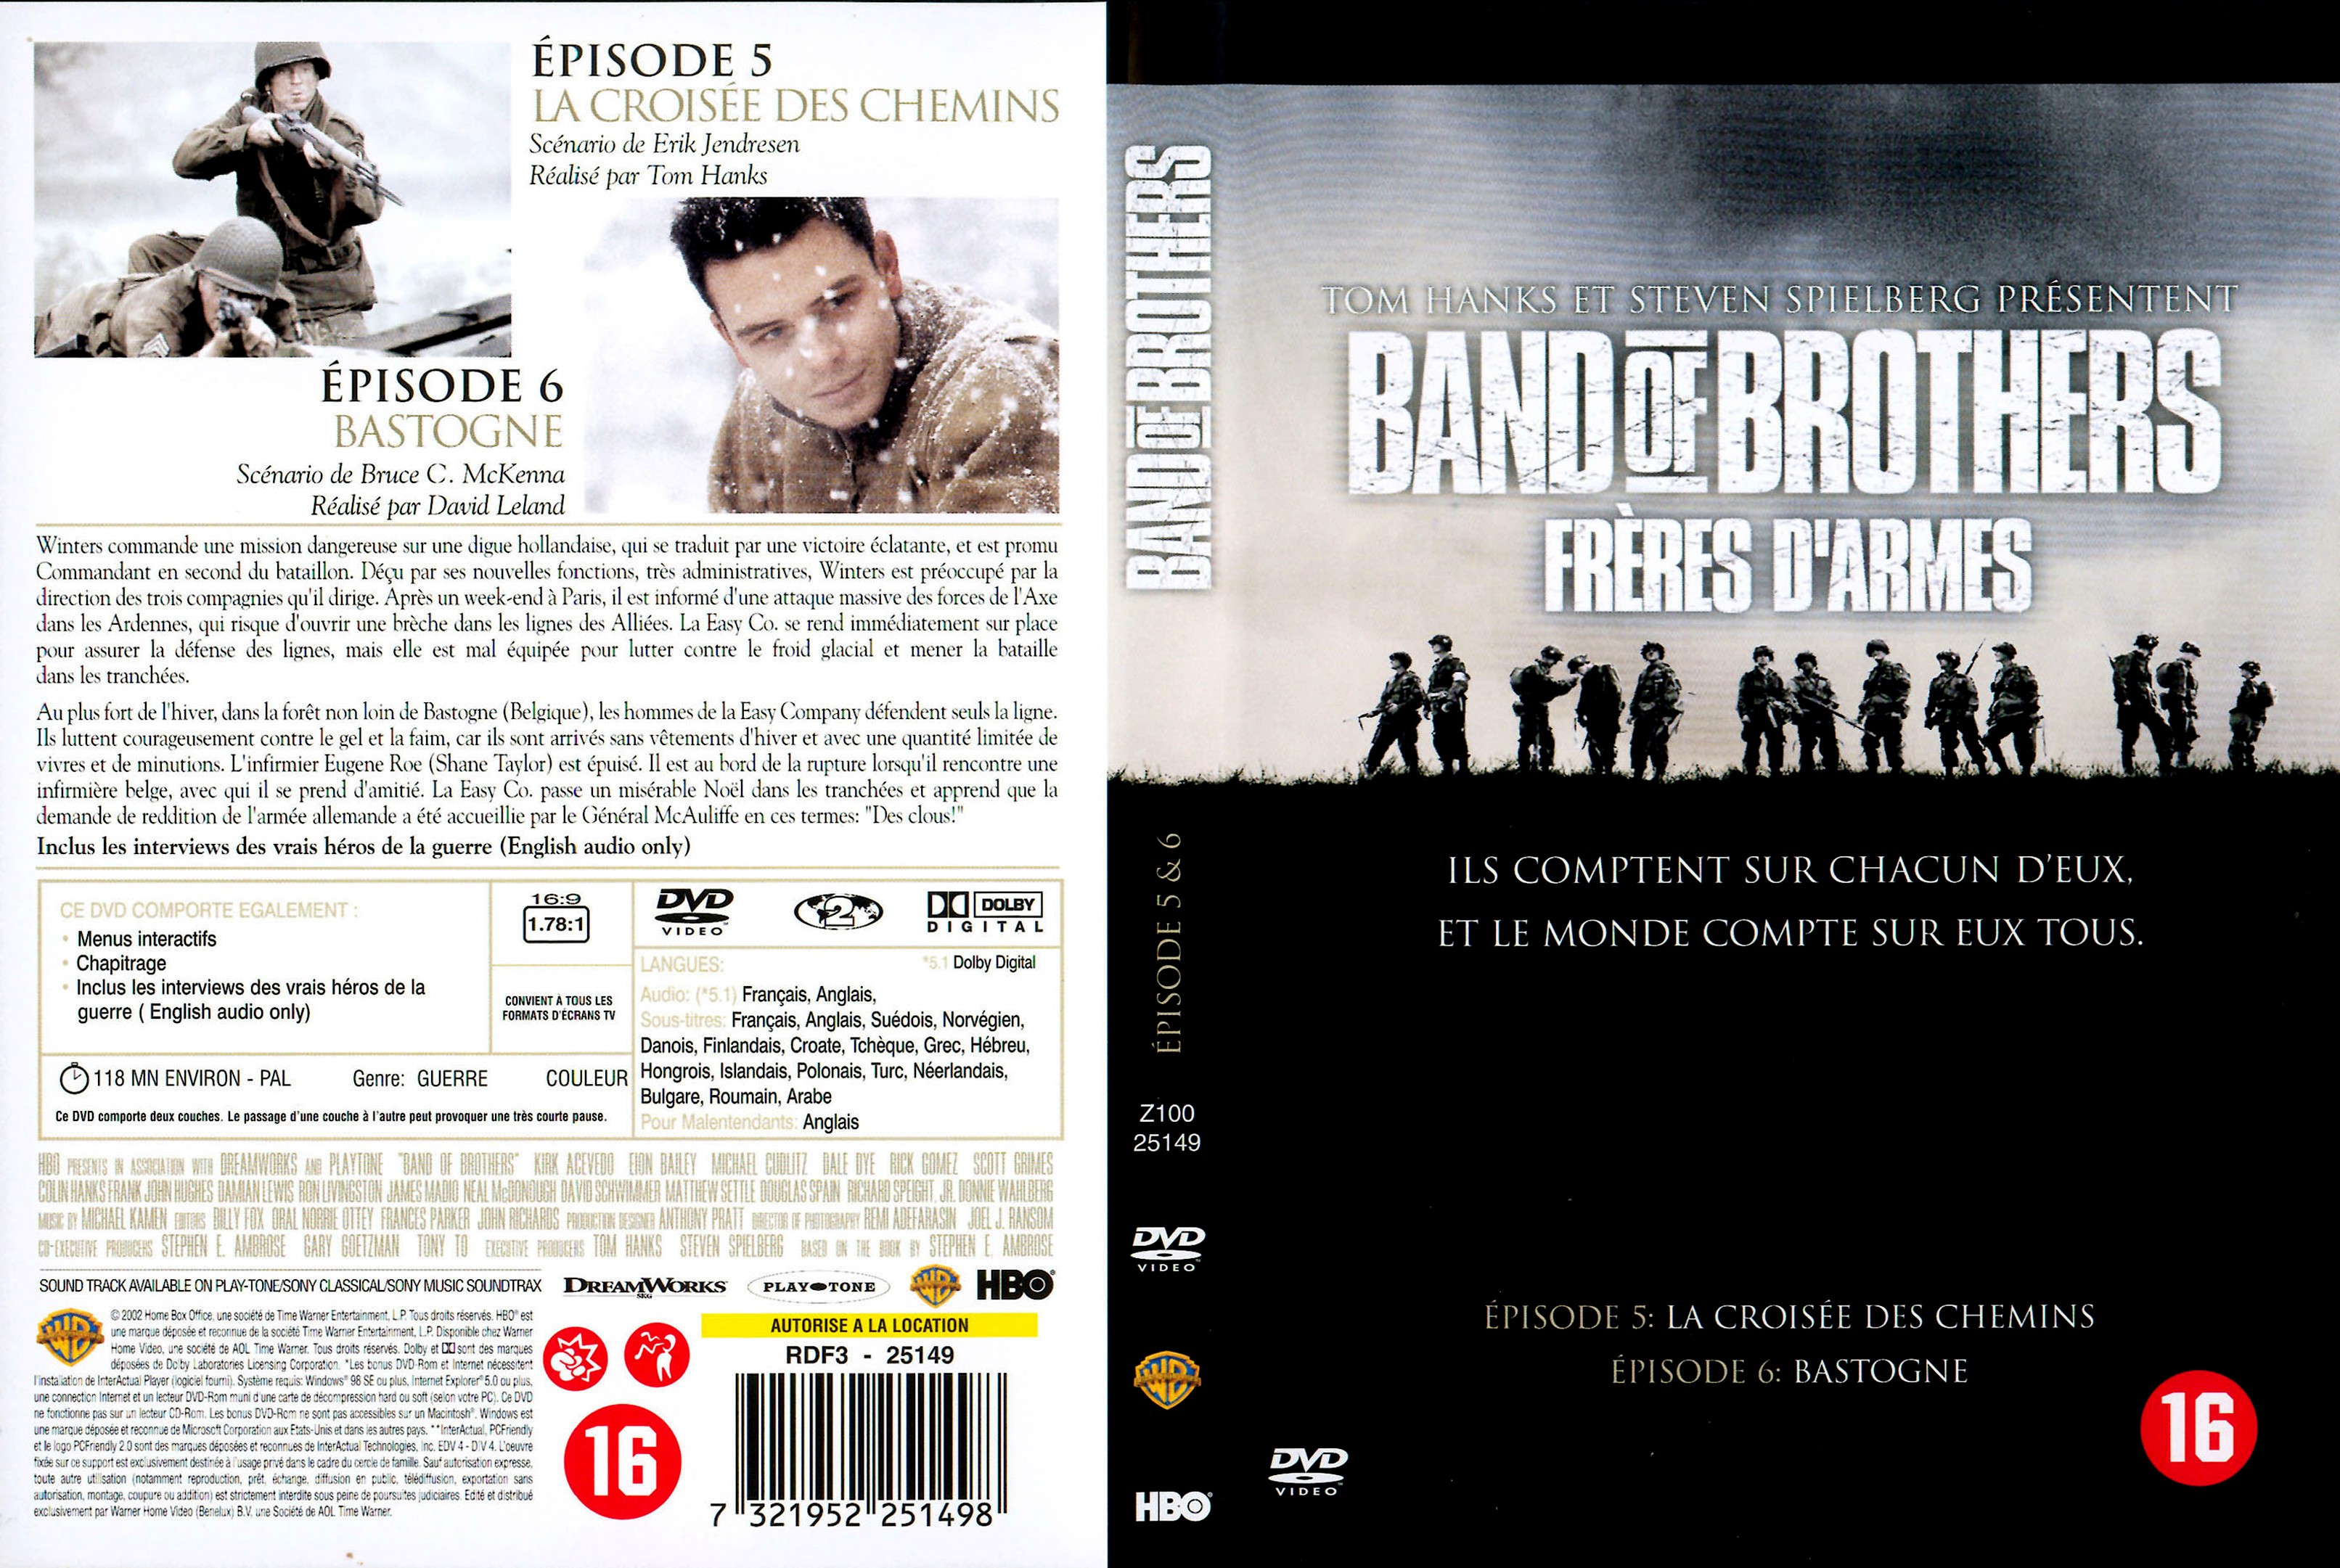 Jaquette DVD Band of brothers vol 3